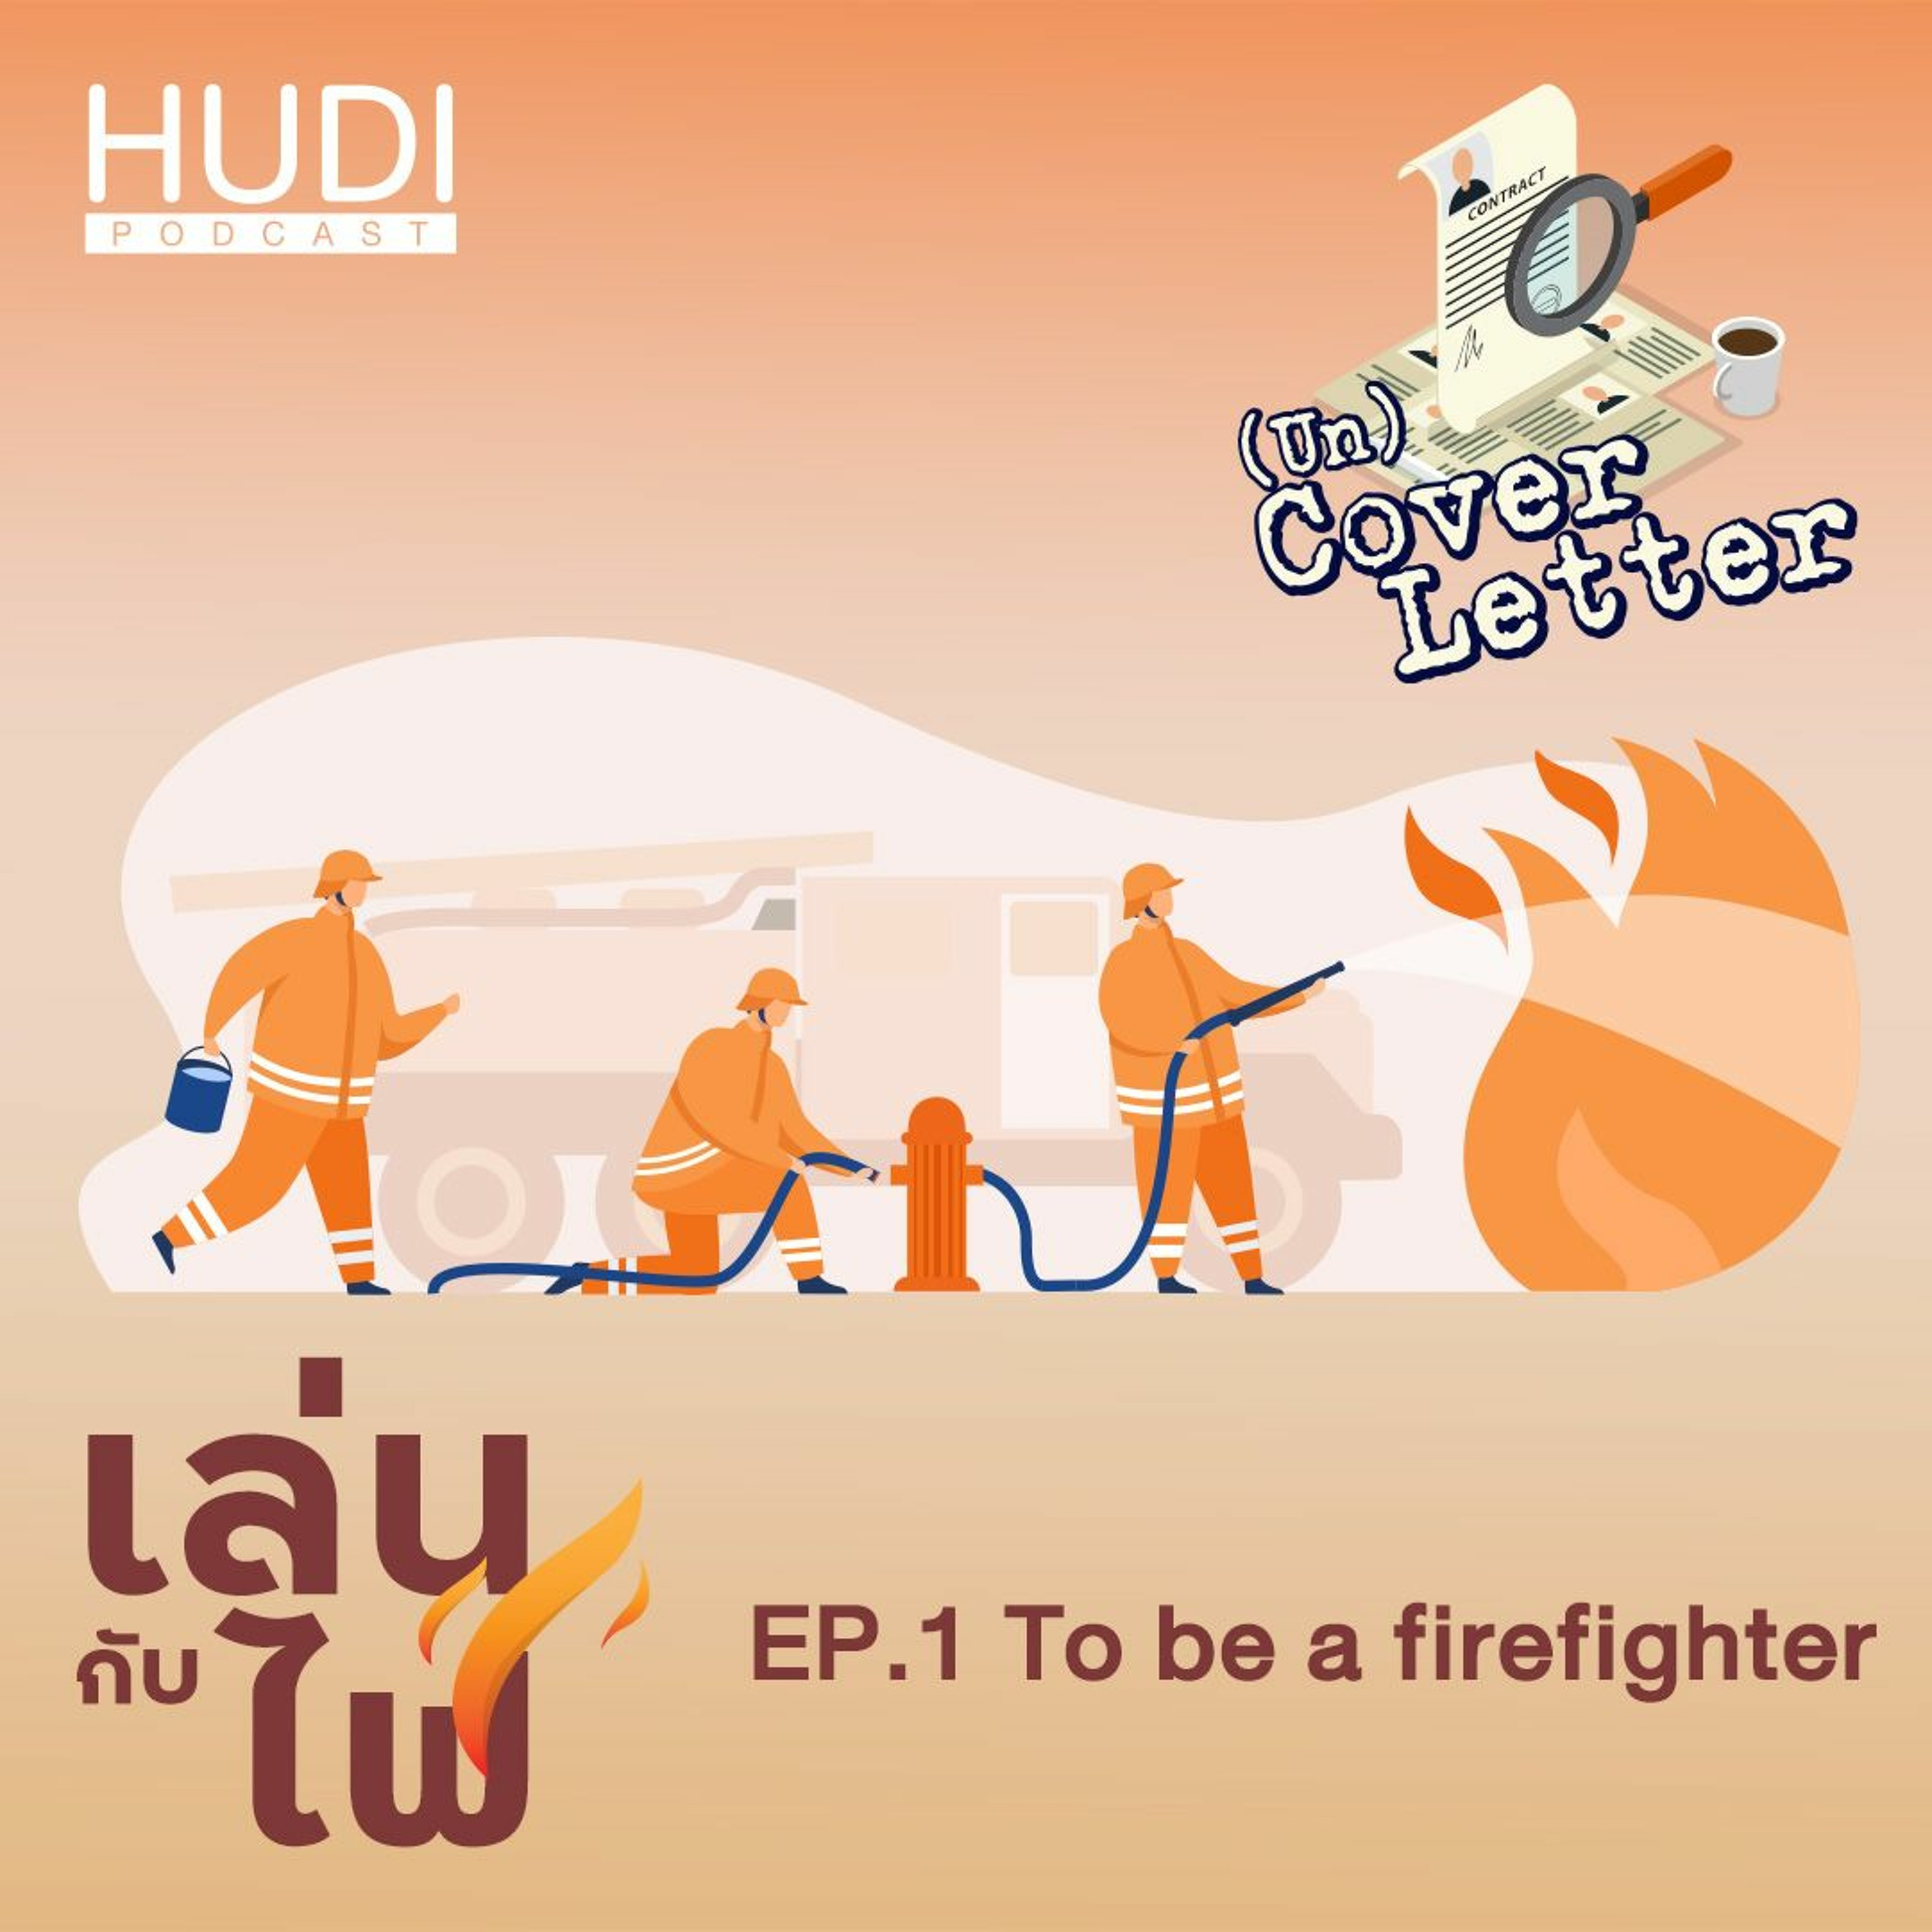 (Un) Cover Letter เล่นกับไฟ Ep.01 - To Be A Firefighter